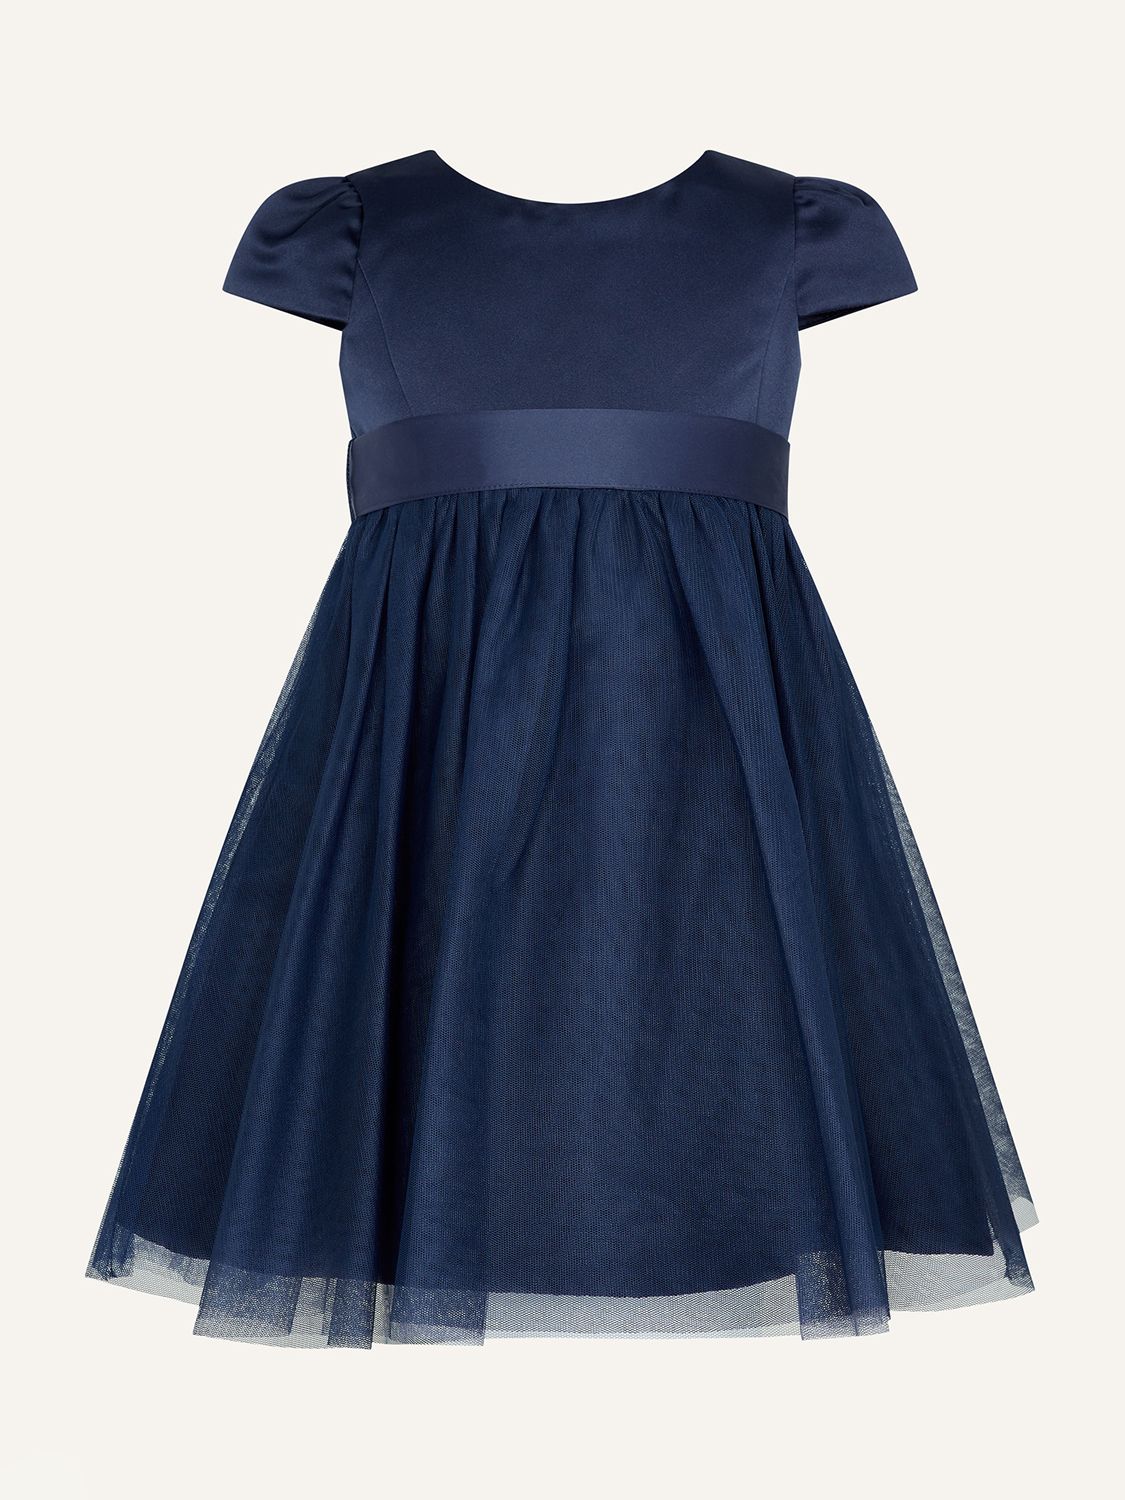 Monsoon Baby Sew Tulle Bridesmaids Dress, Navy, 0-3 months